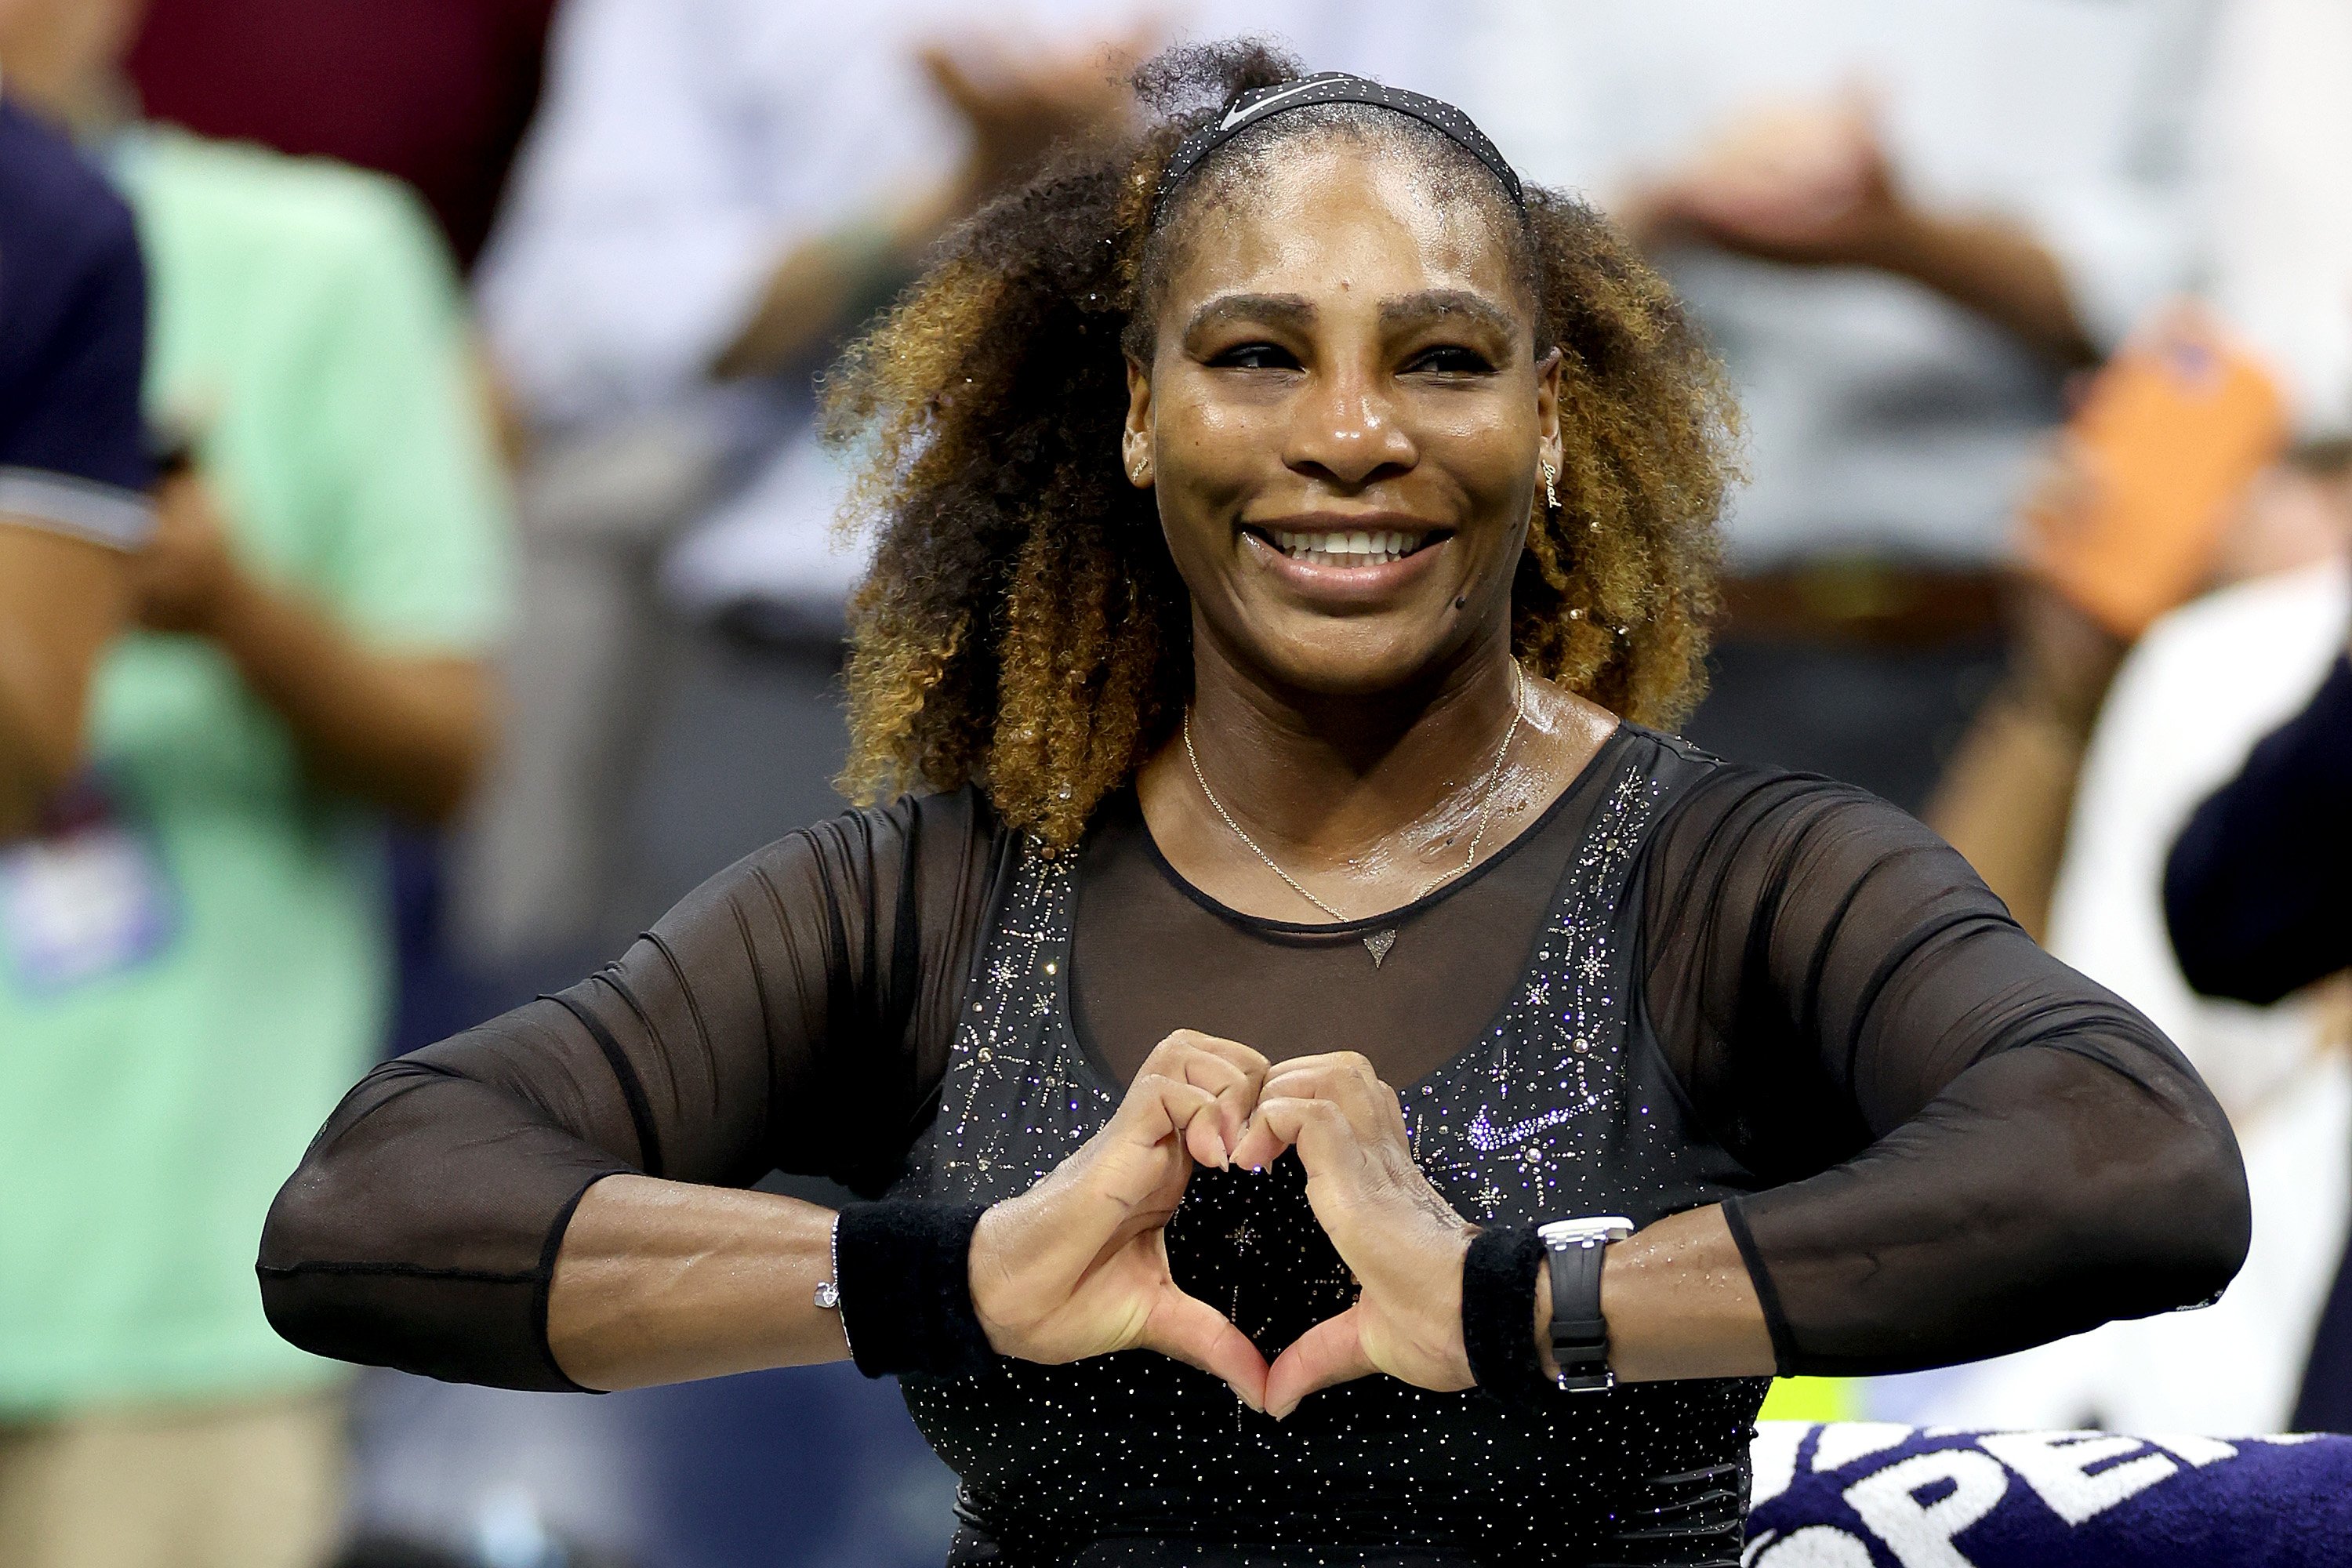 Serena Williams celebrates during the Women's Singles First Round at the US Open on August 29, 2022, in the Flushing neighborhood of the Queens borough of New York City | Source: Getty Images